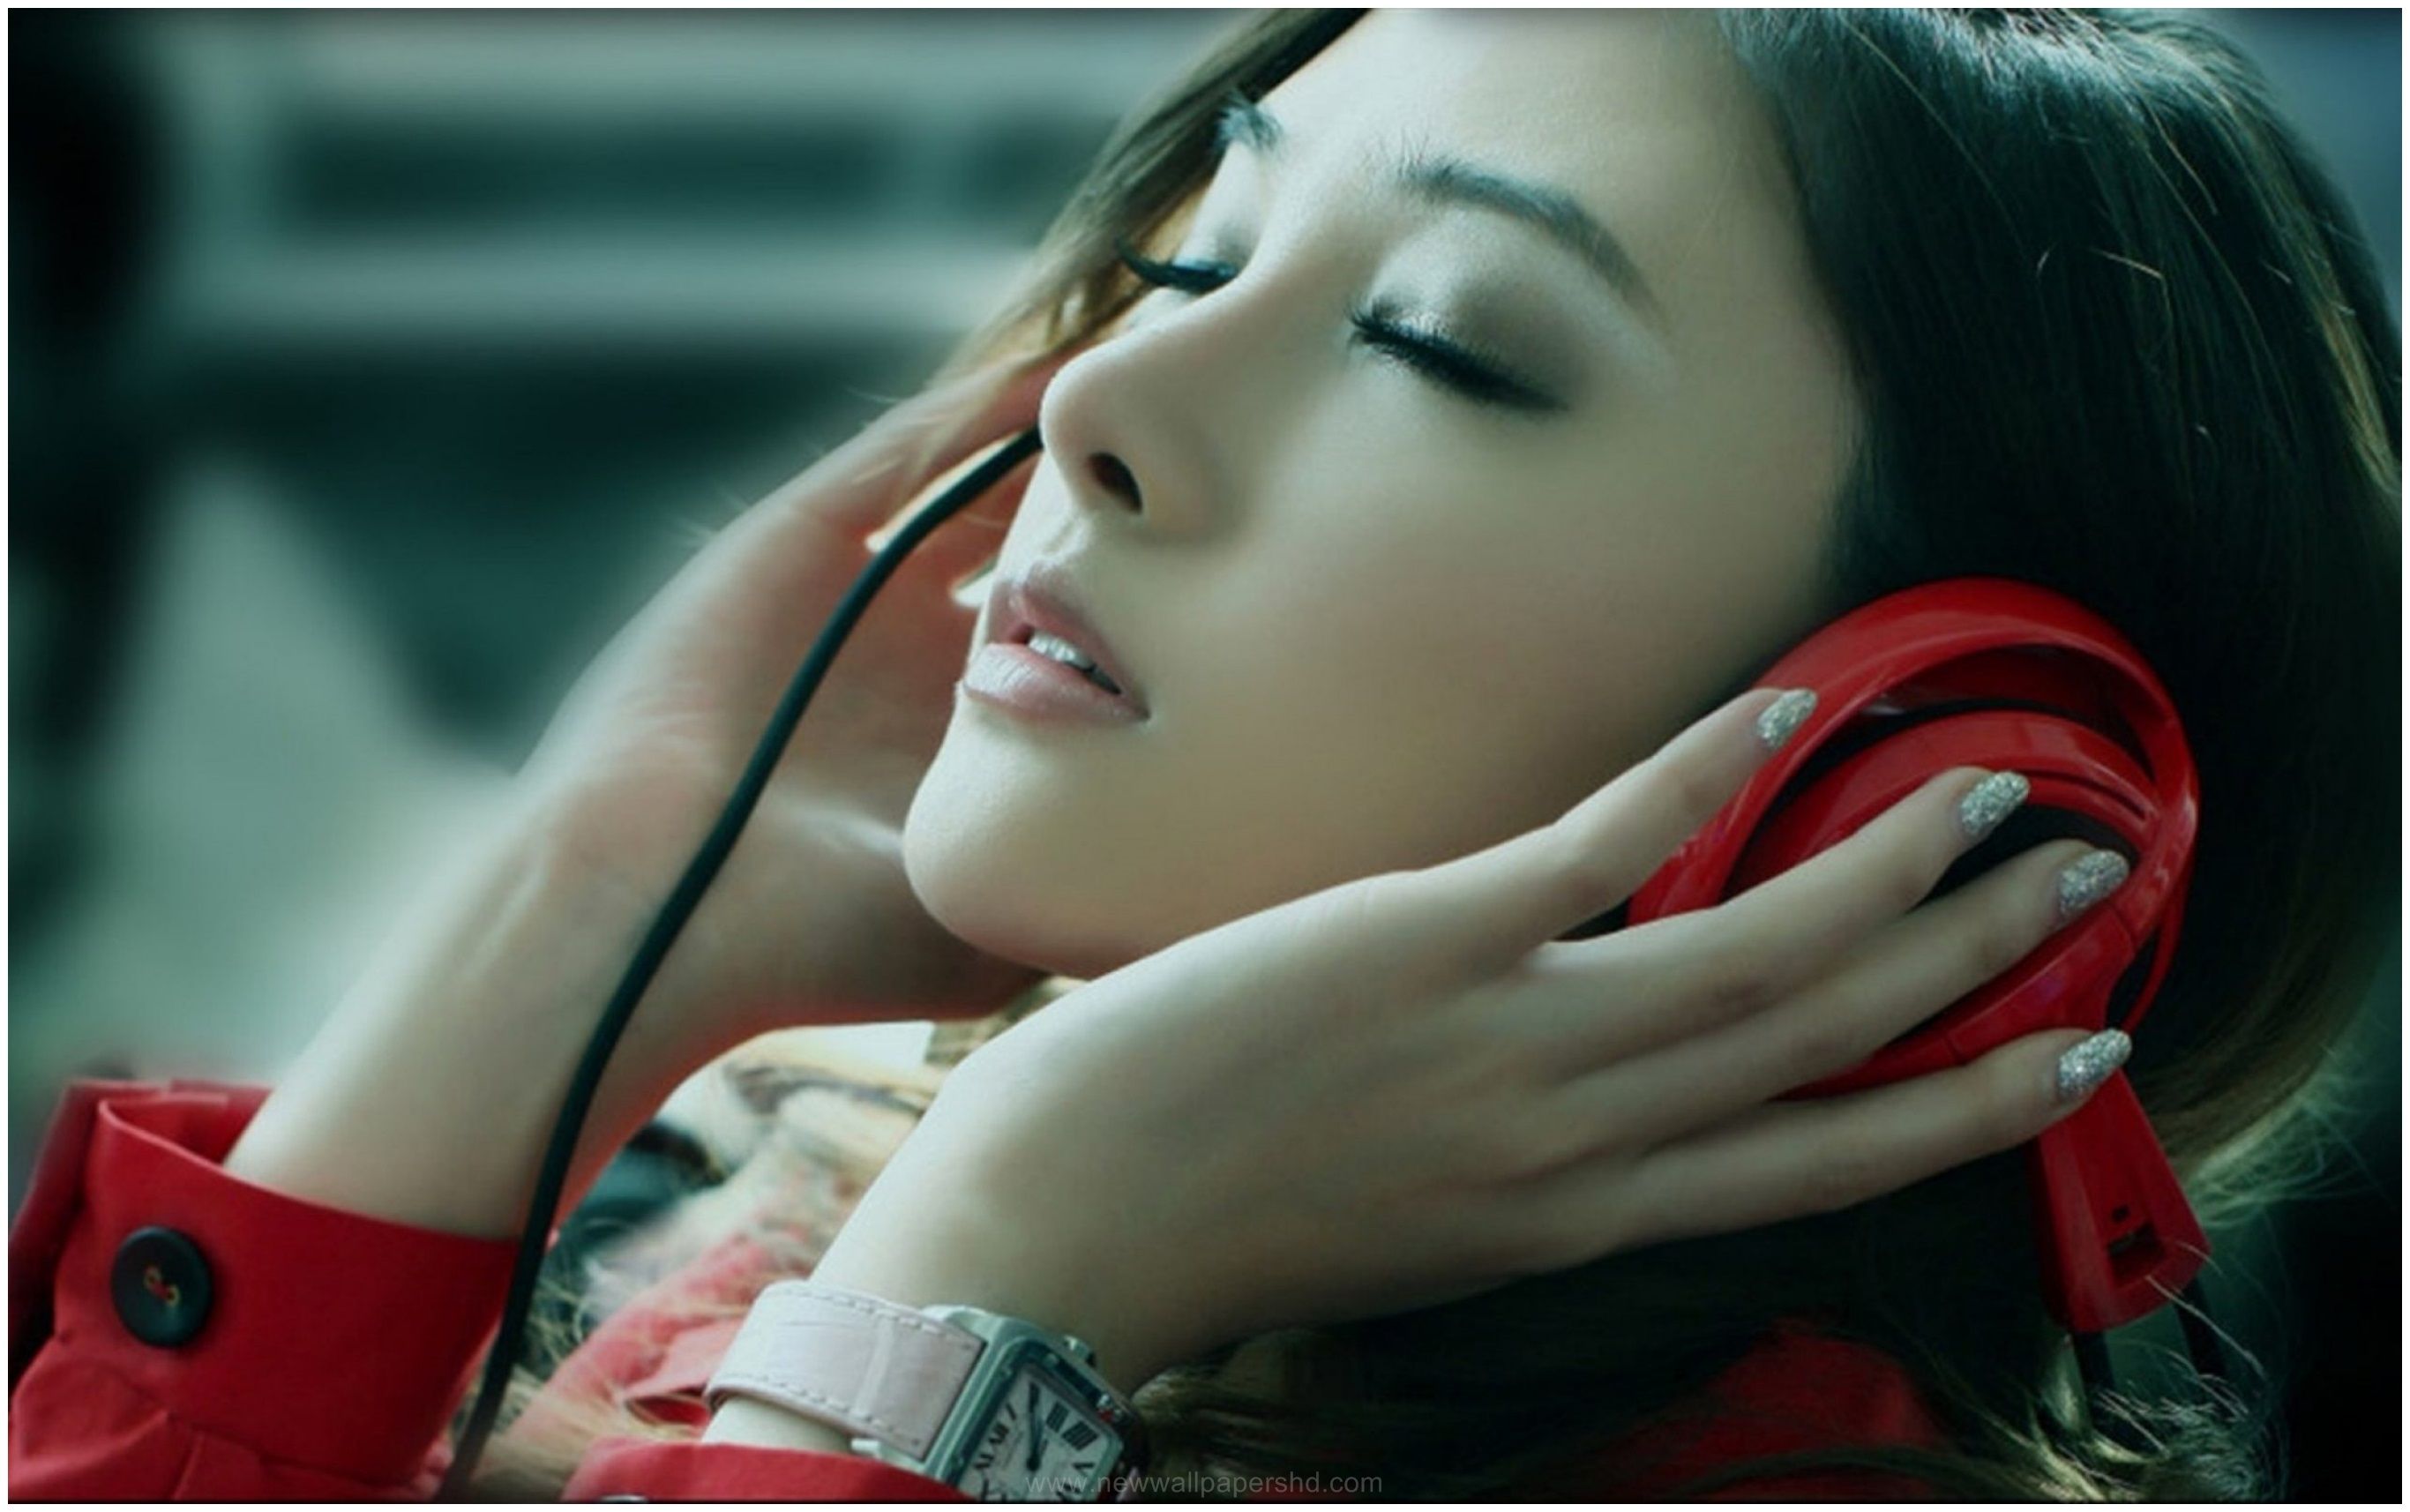 Image For Cute Girl Listening To Music HD Wallpaper Girl With Headphones HD Wallpaper